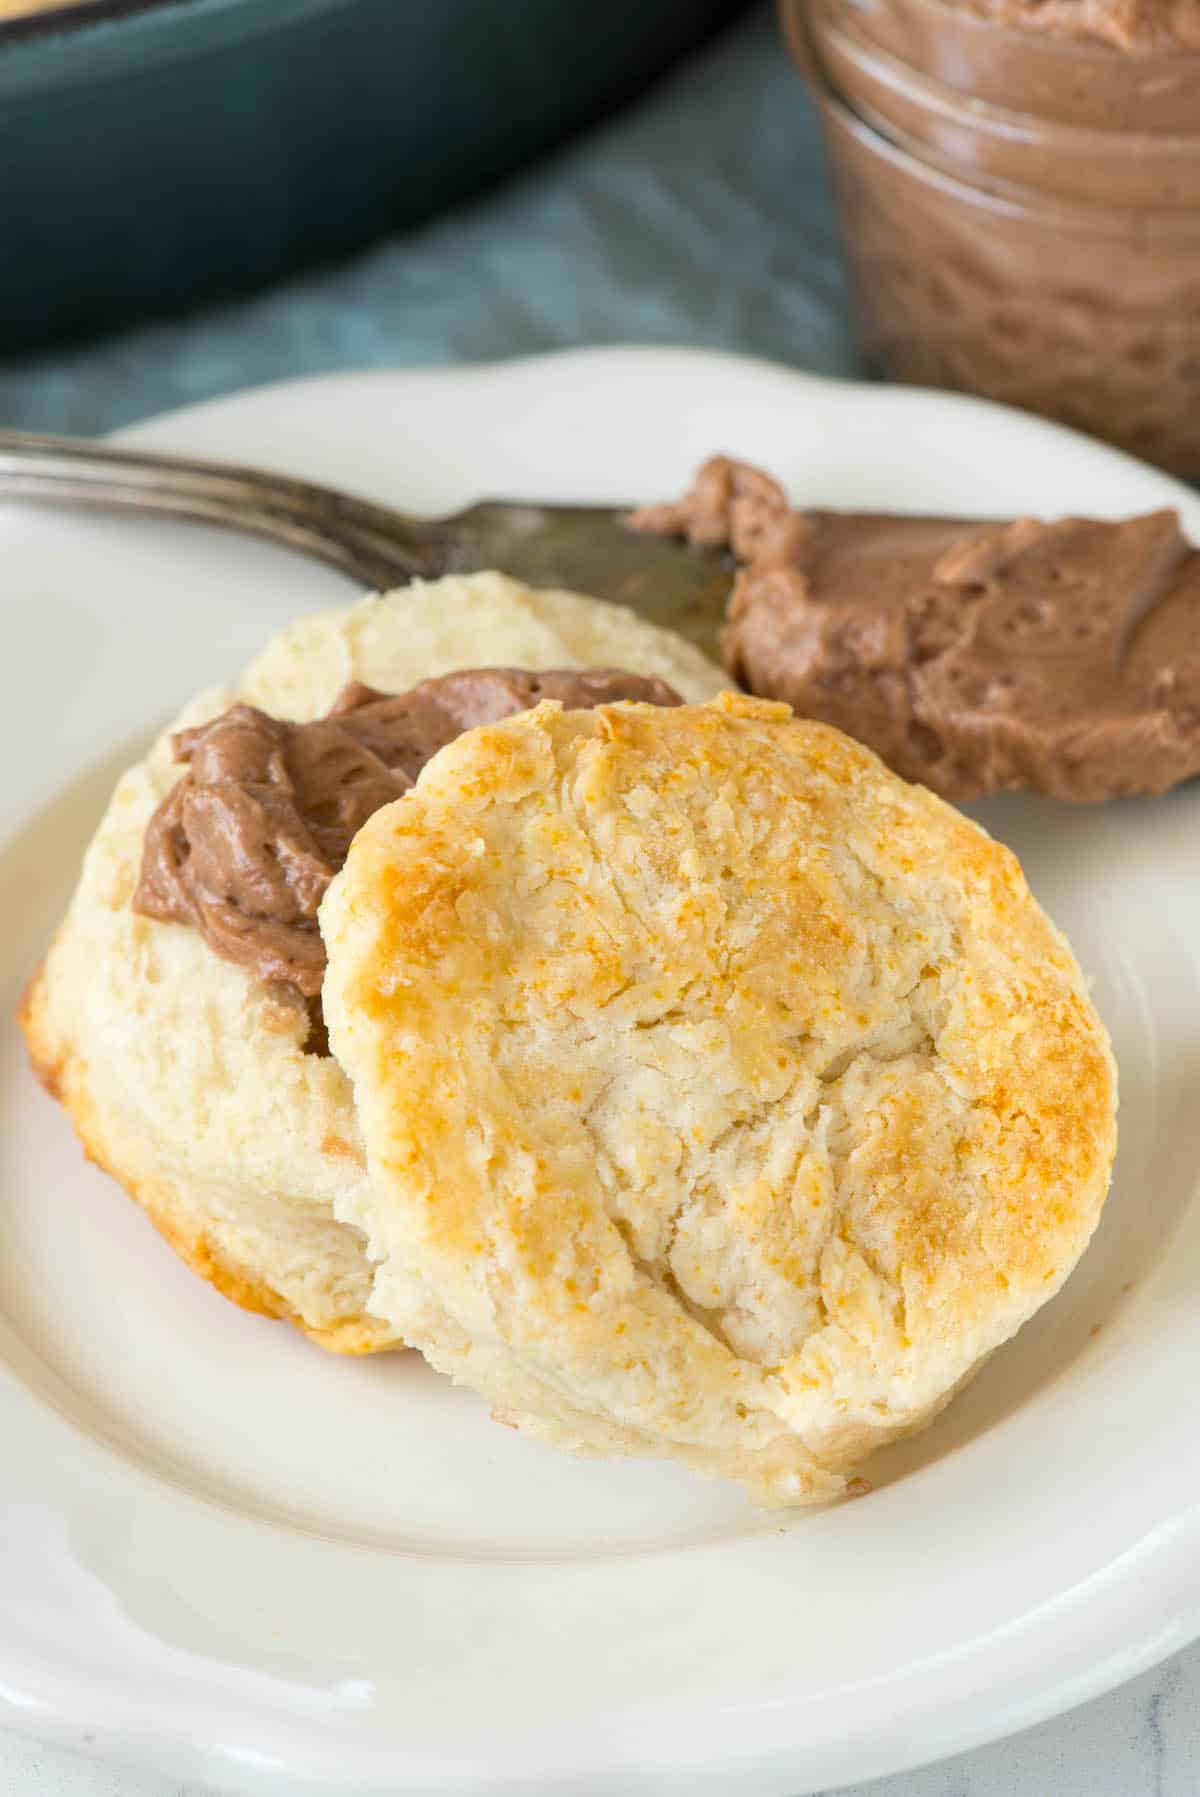 biscuits with chocolate homey butter spread on the biscuits.